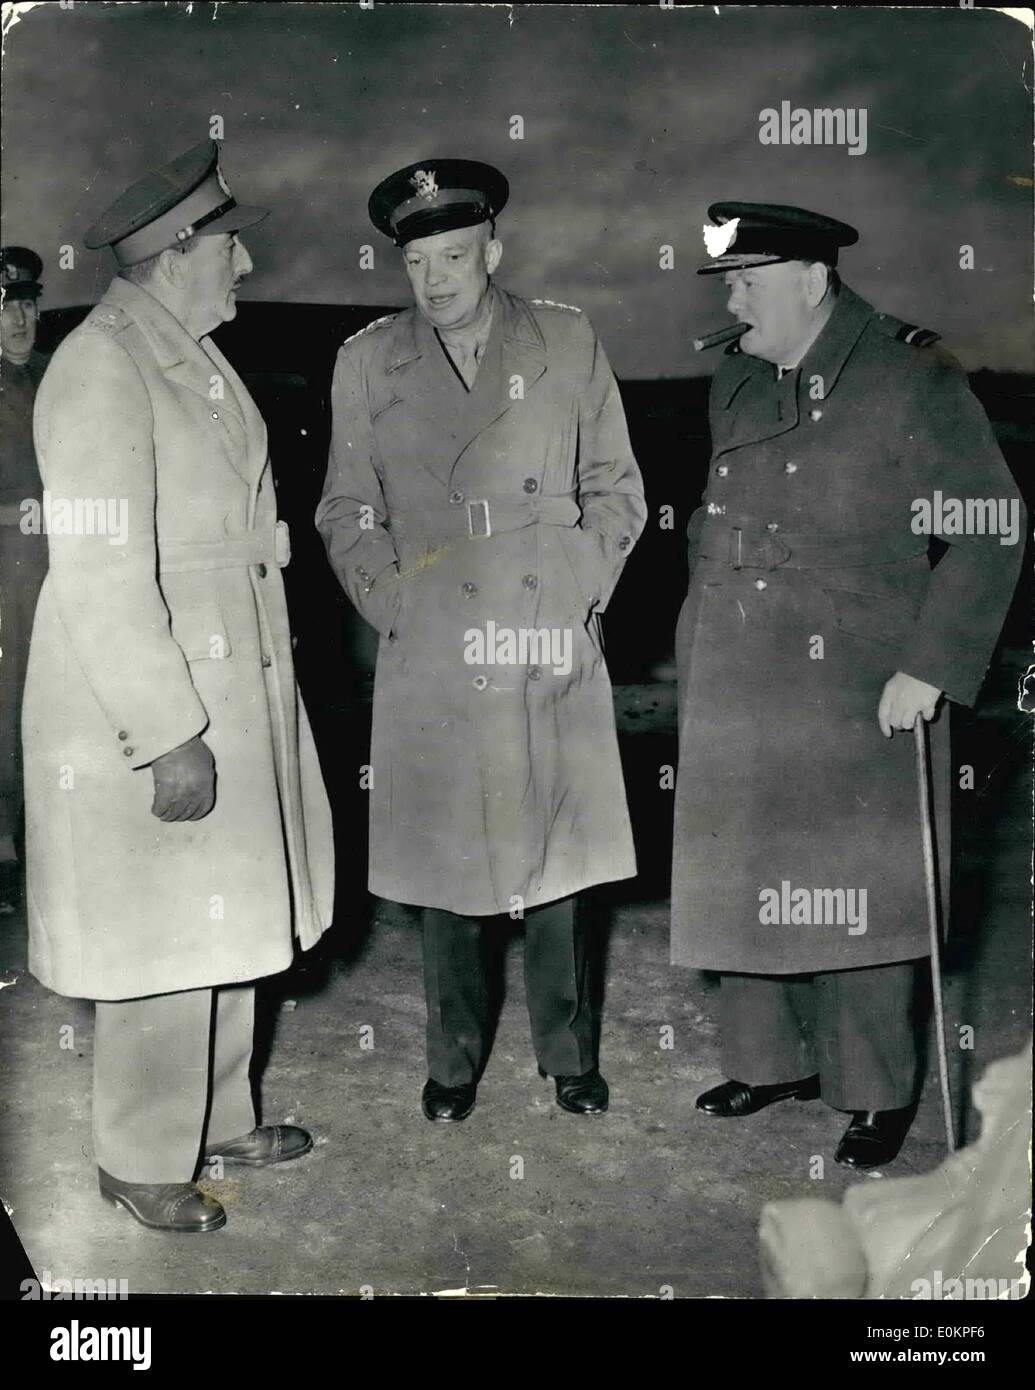 Nov. 11, 1944 - Mr. Churchchill Meet Gen. Eisenhower In France: General Dwight D. Eisenhower drove to the airport with Prime Minister Winston Churchchill as the English Statesman left with his party. on left is field marshall Sir Alan Brooke. Stock Photo